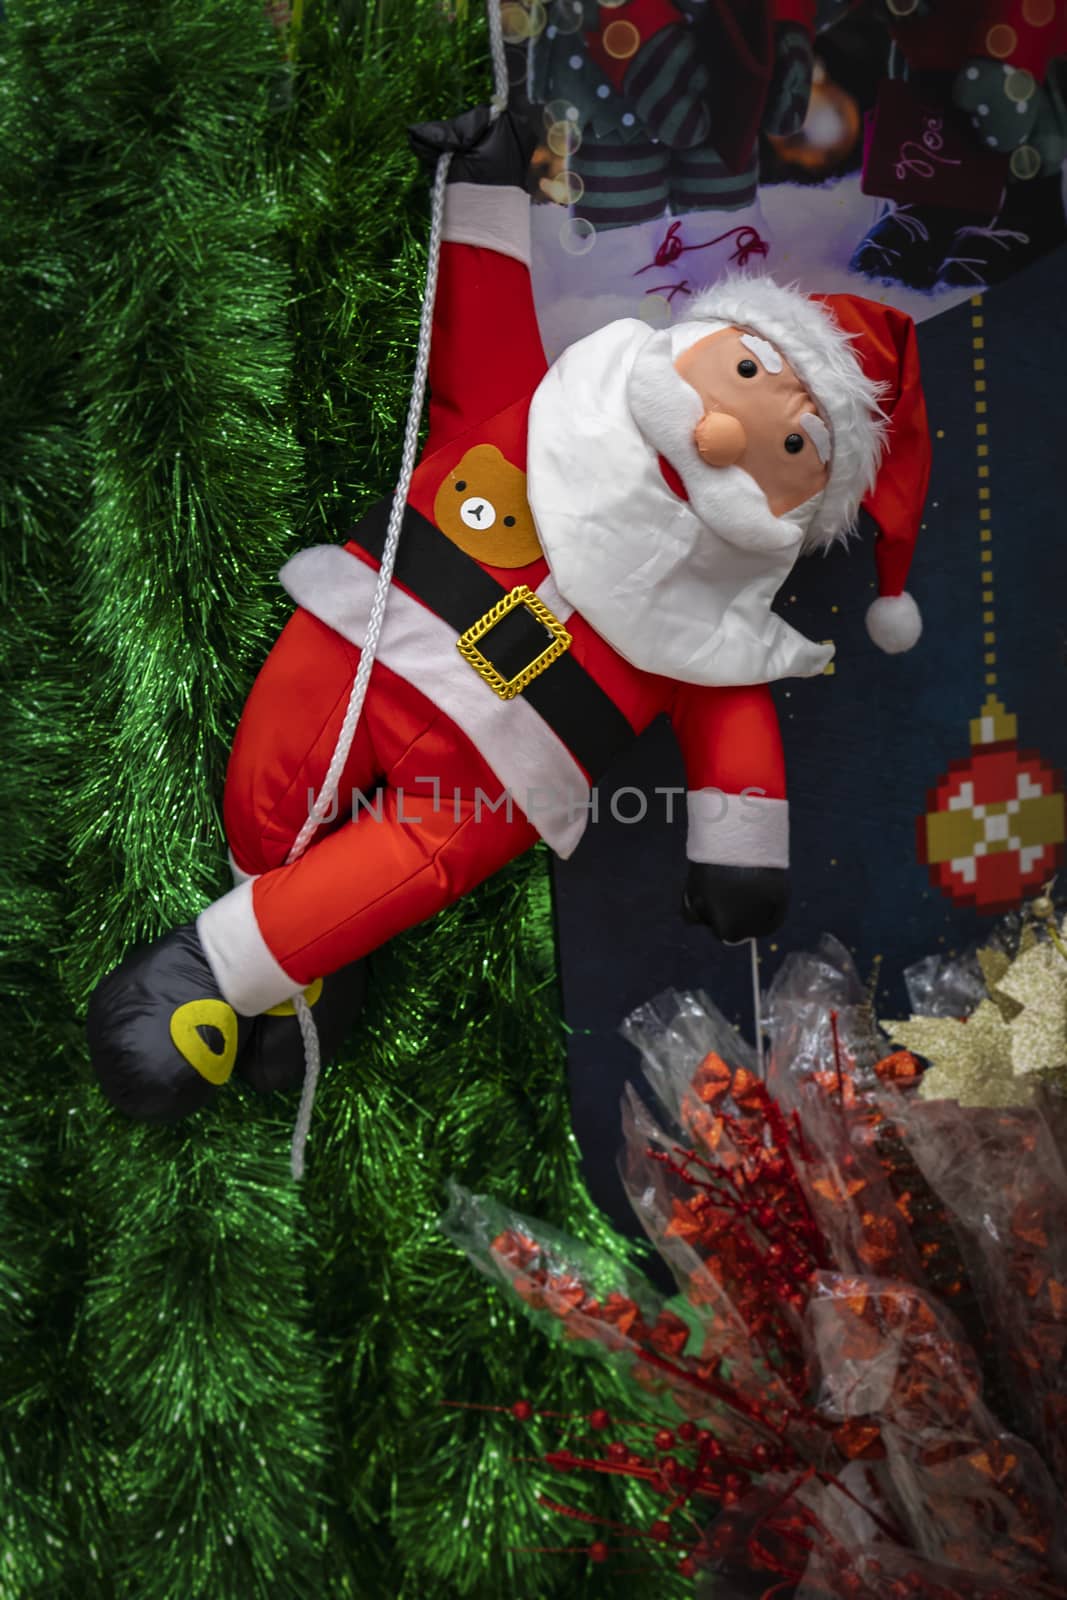 New Year's decoration Santa Claus in a red suit by bonilook